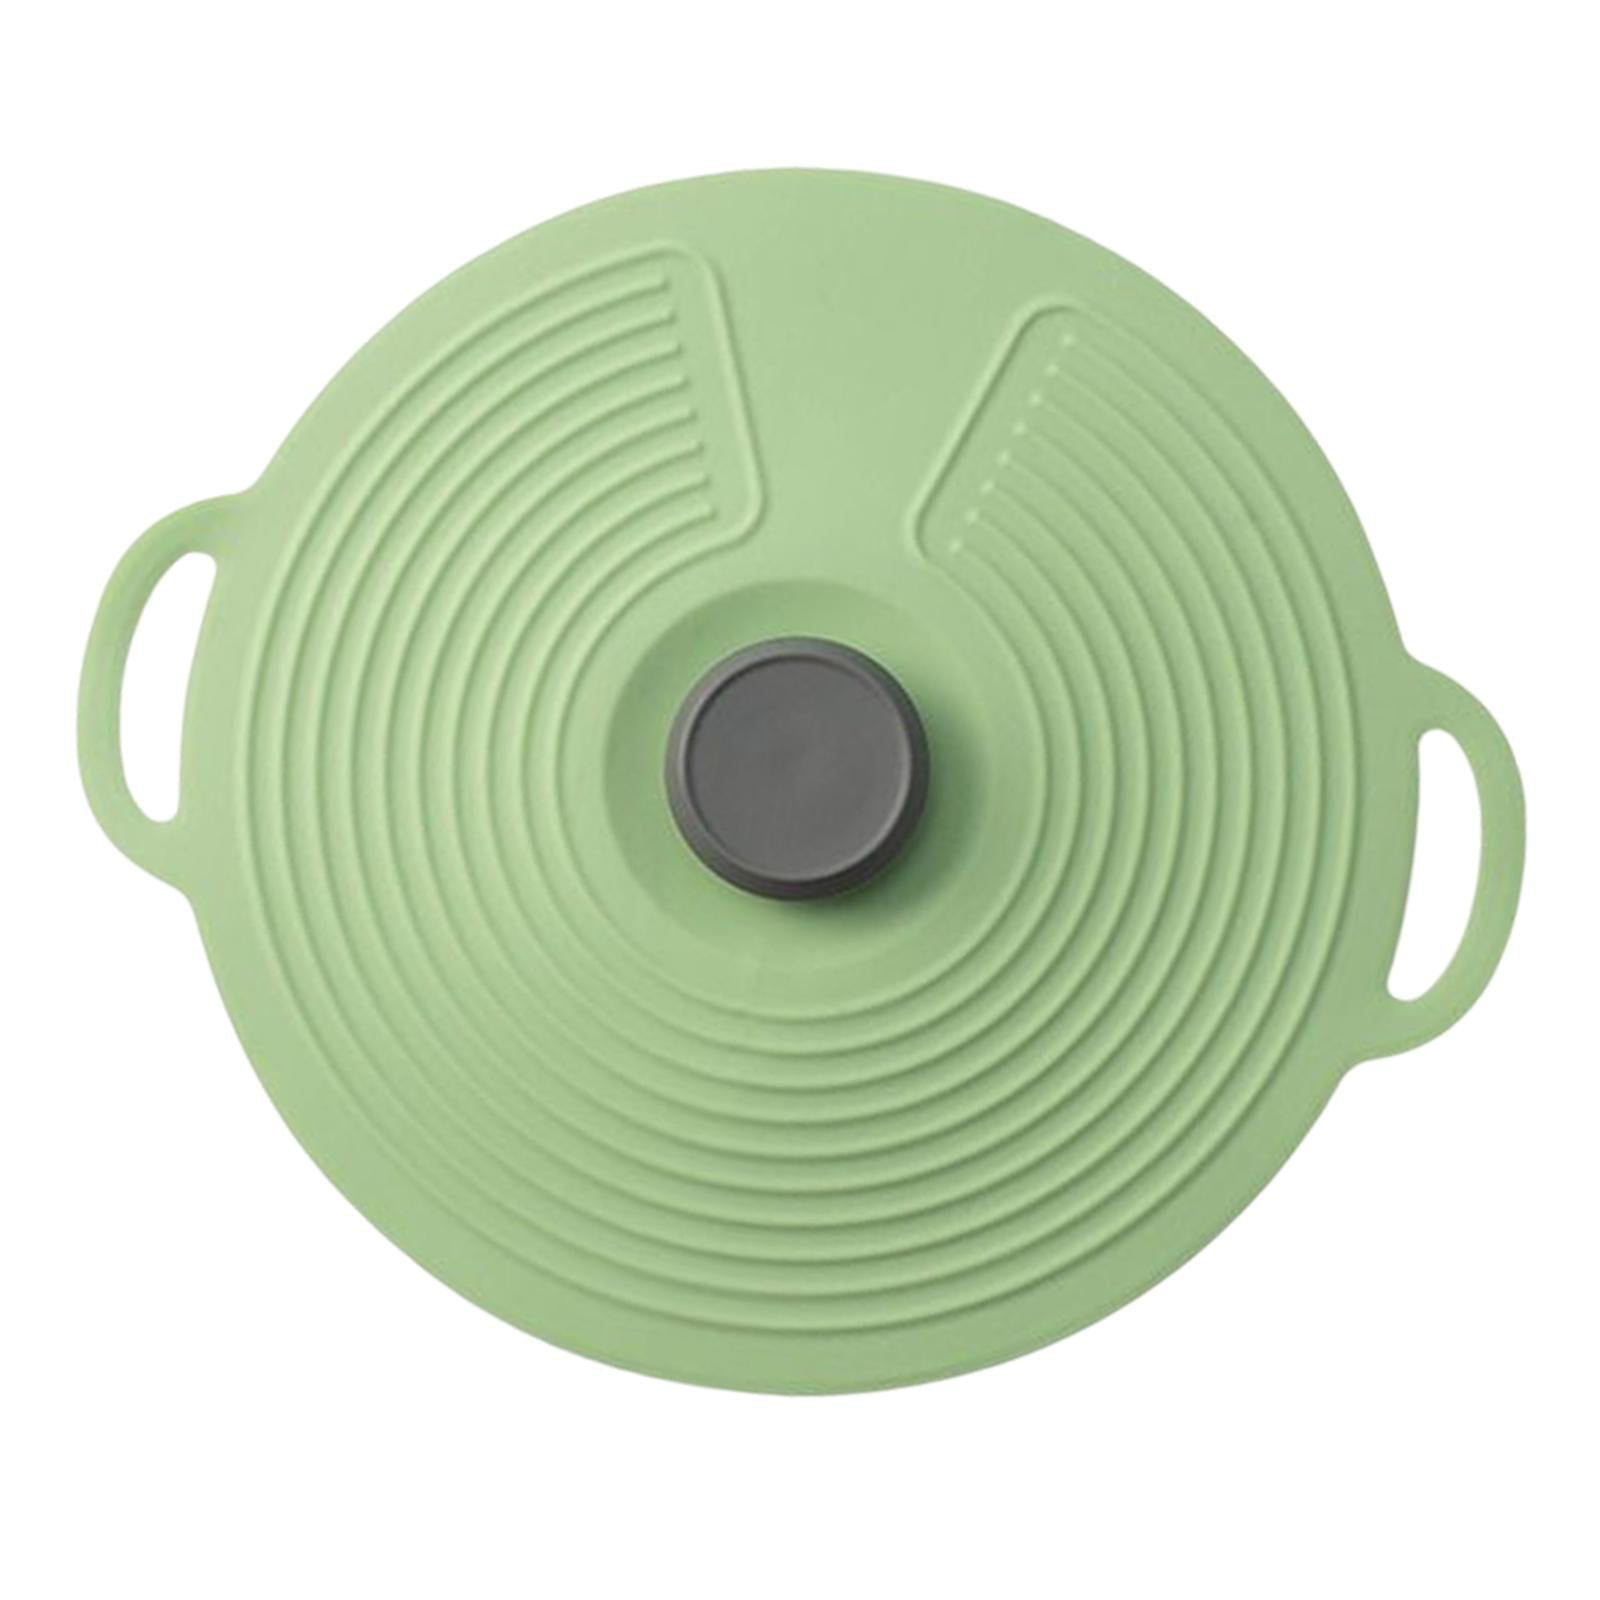 Silicone Bowl Lids Green Set of 5 Reusable Suction Seal Covers for Bowls,  Pots, Cups. Food Safe. Natural grip, interlocking handles for easy use and